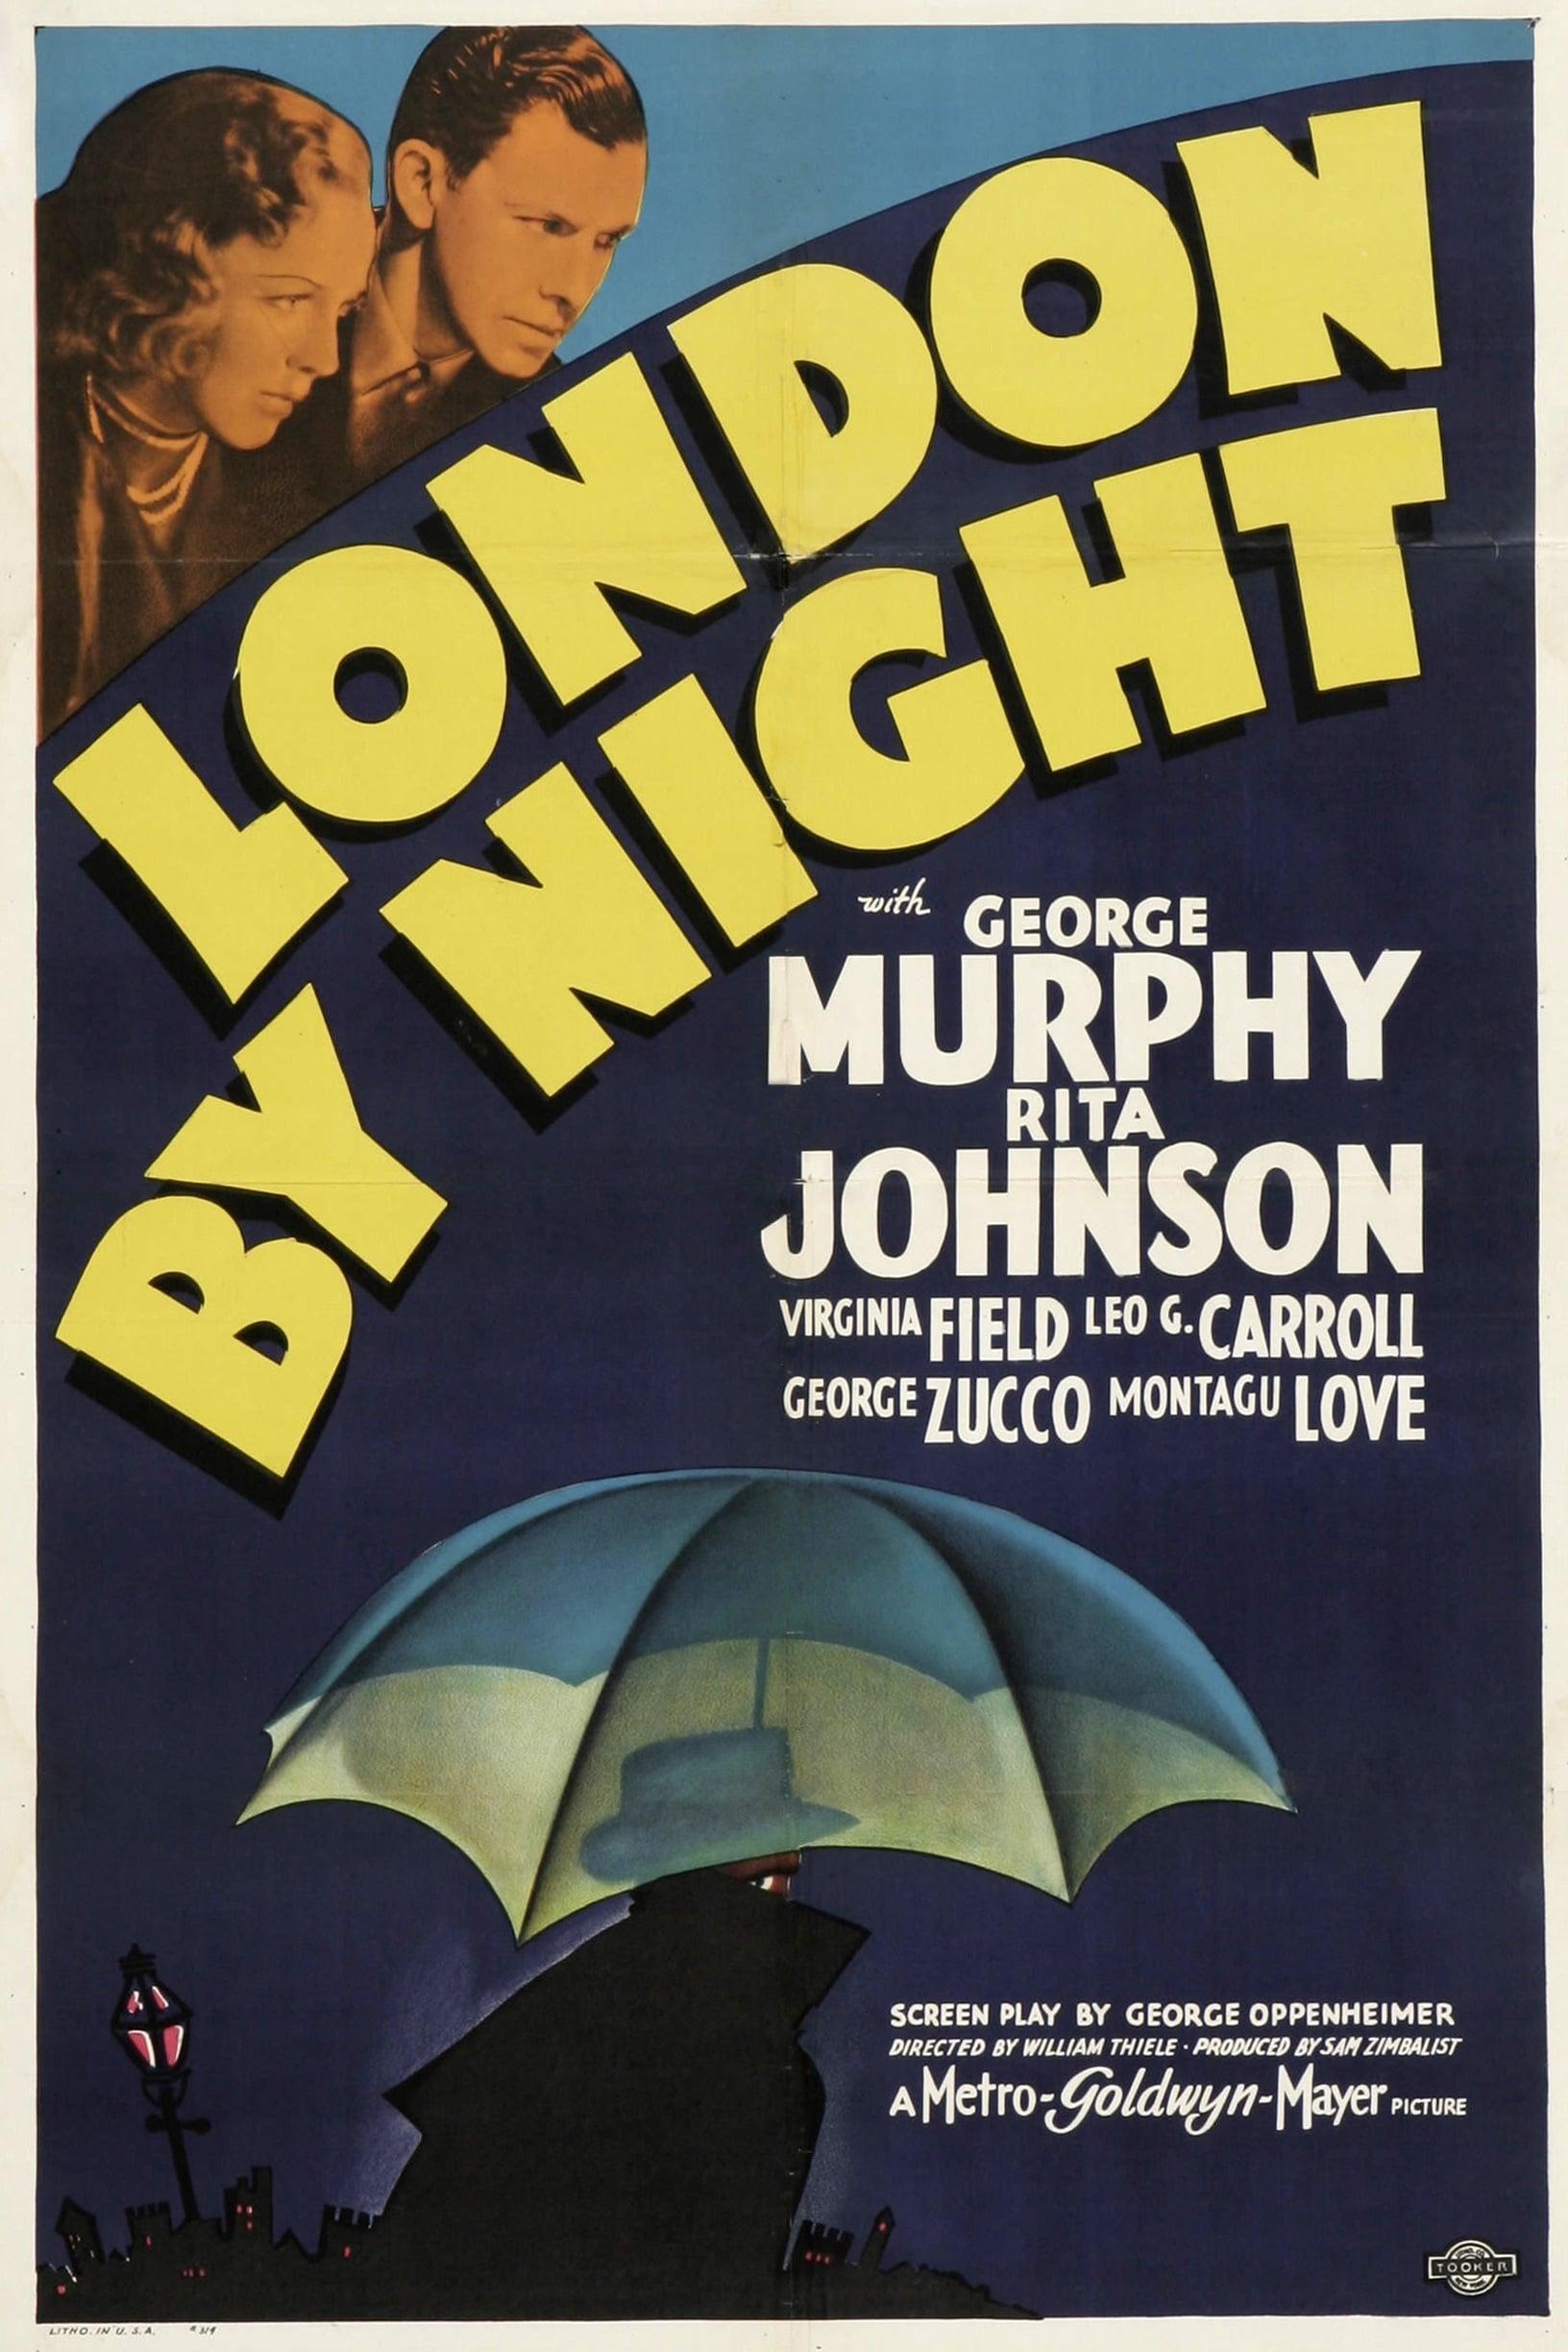 London by Night poster